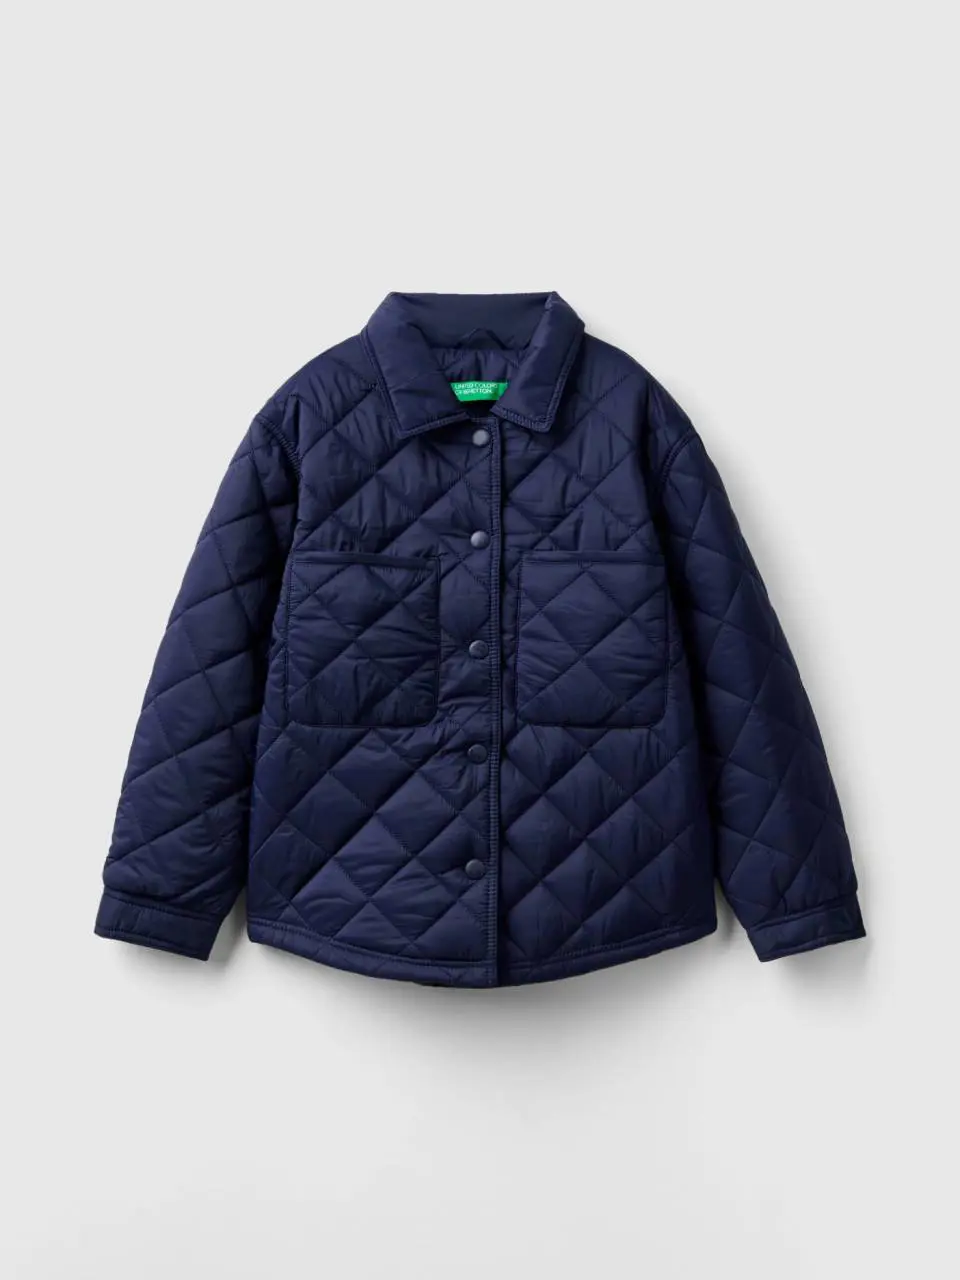 Benetton light quilted jacket. 1